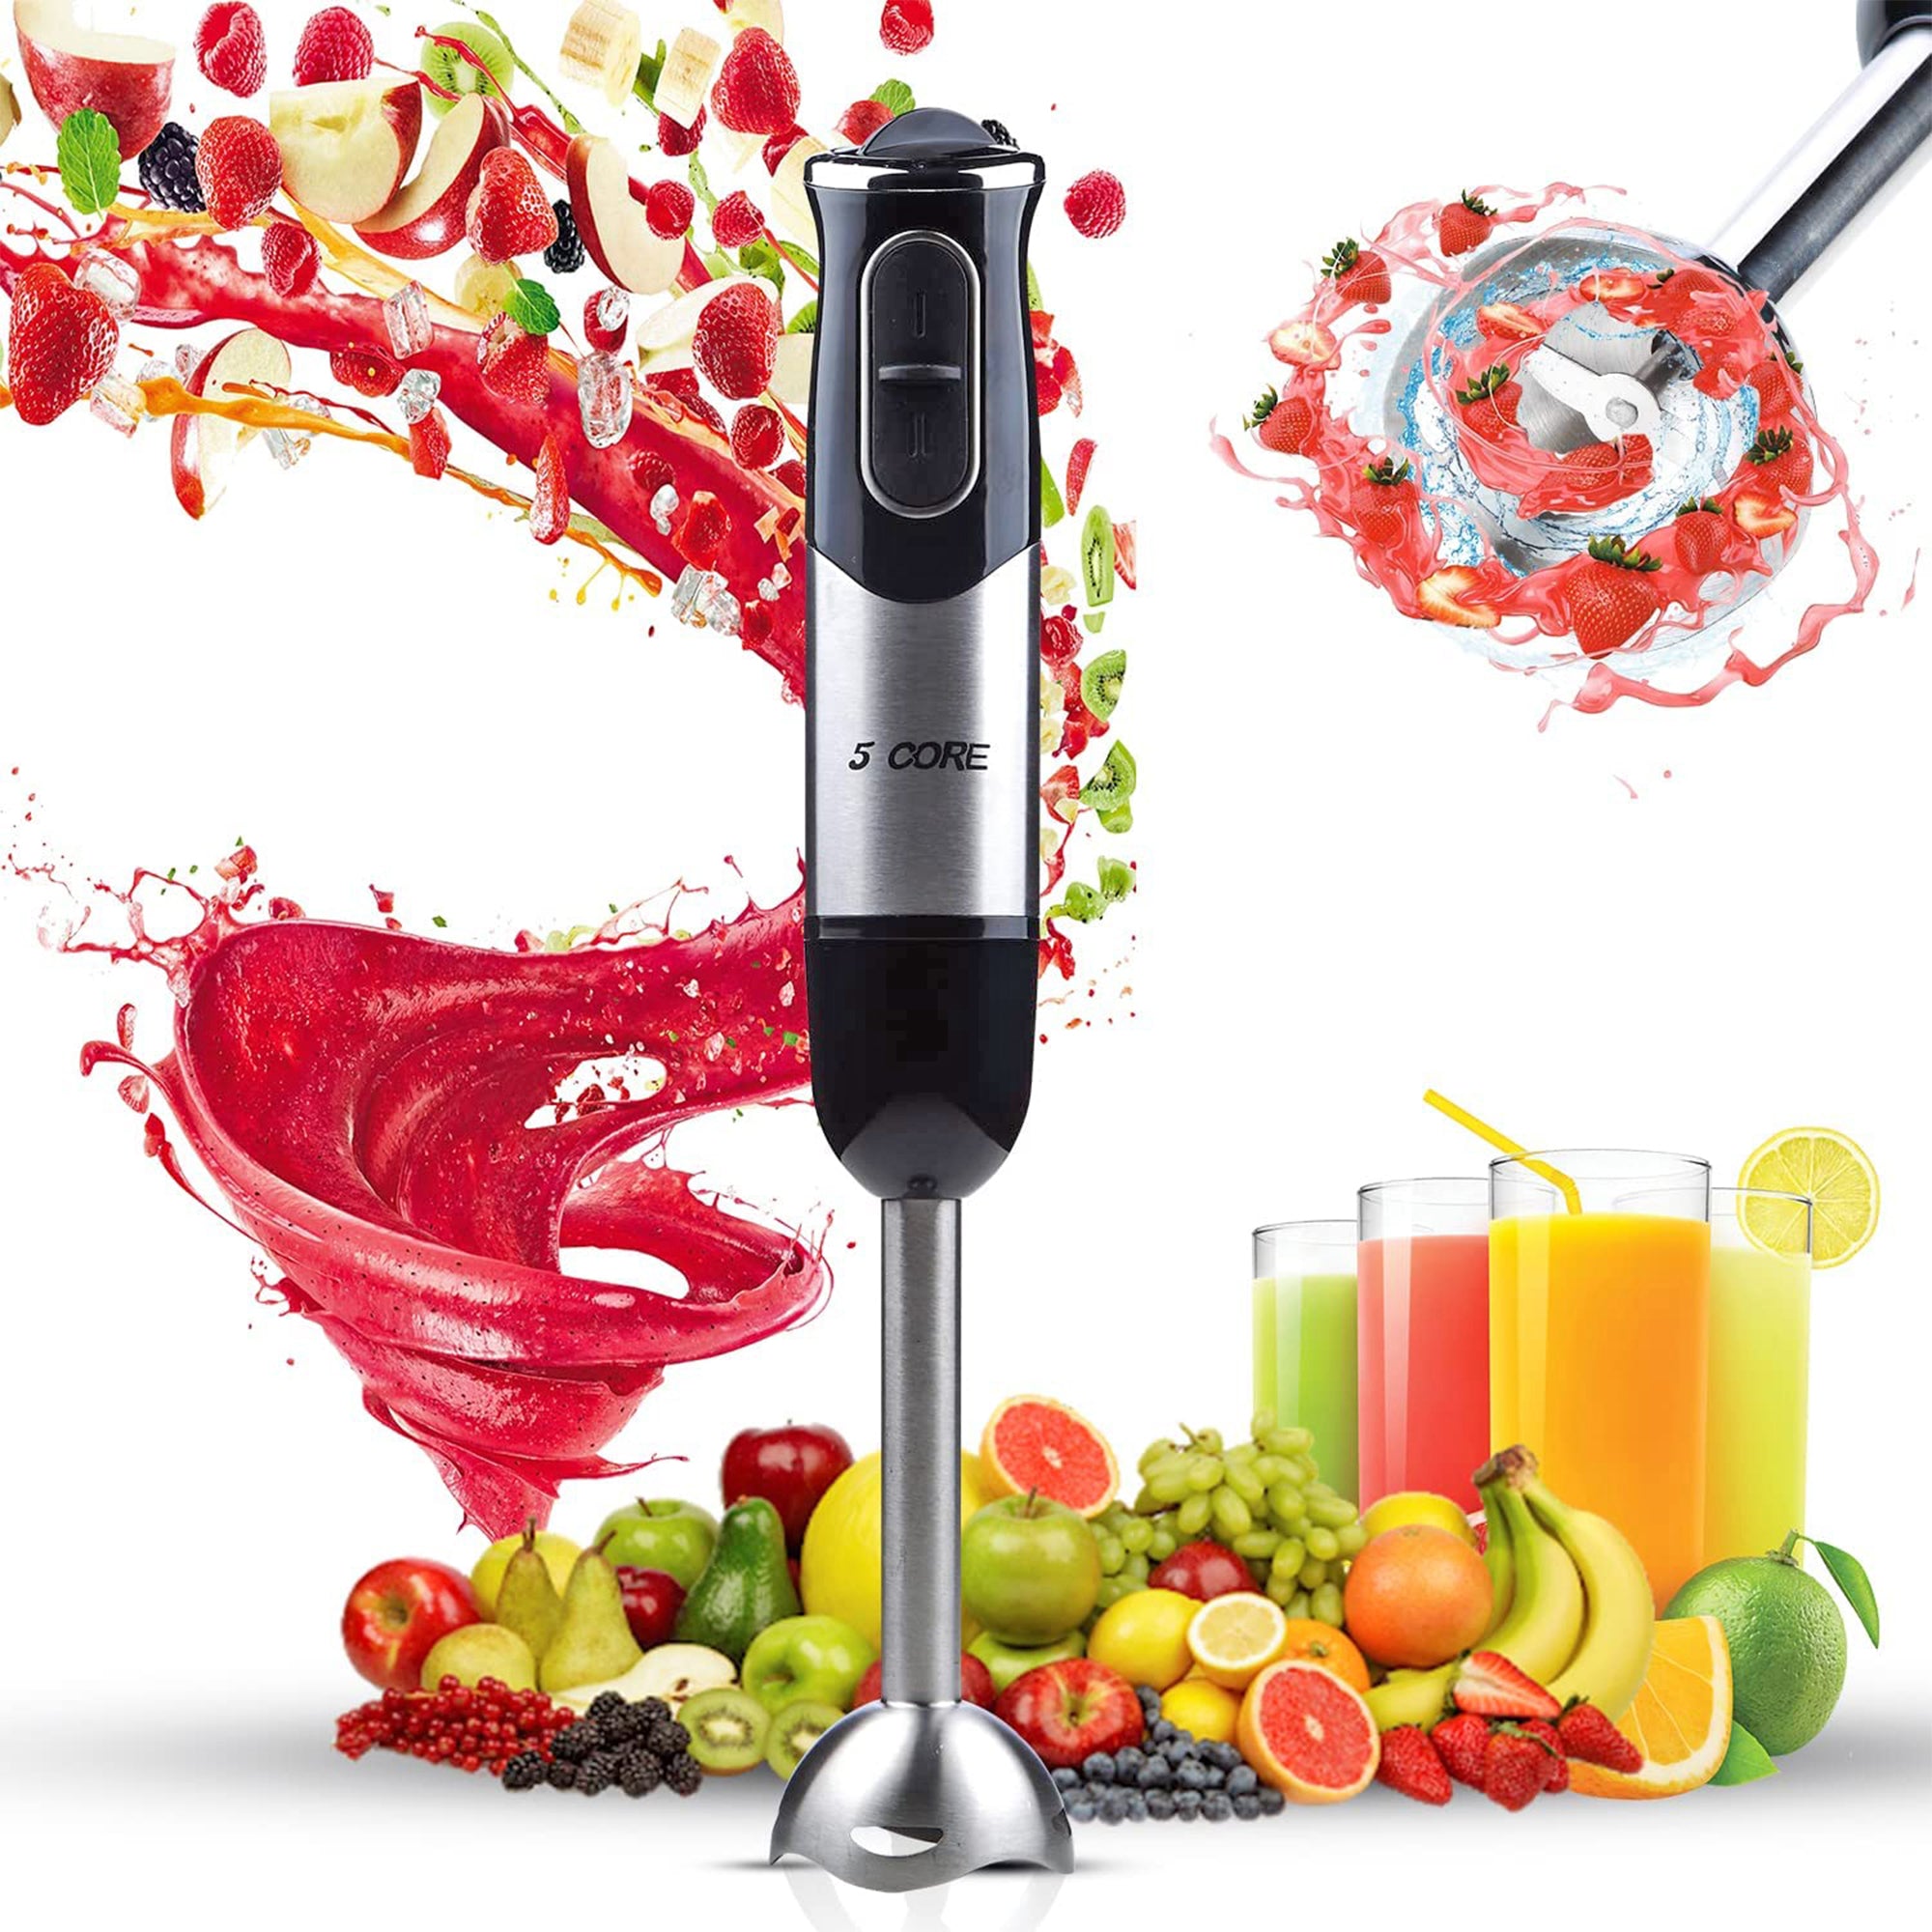 Electric Handheld Blender Buy Online at the Best Prince- 5 Core in 2023